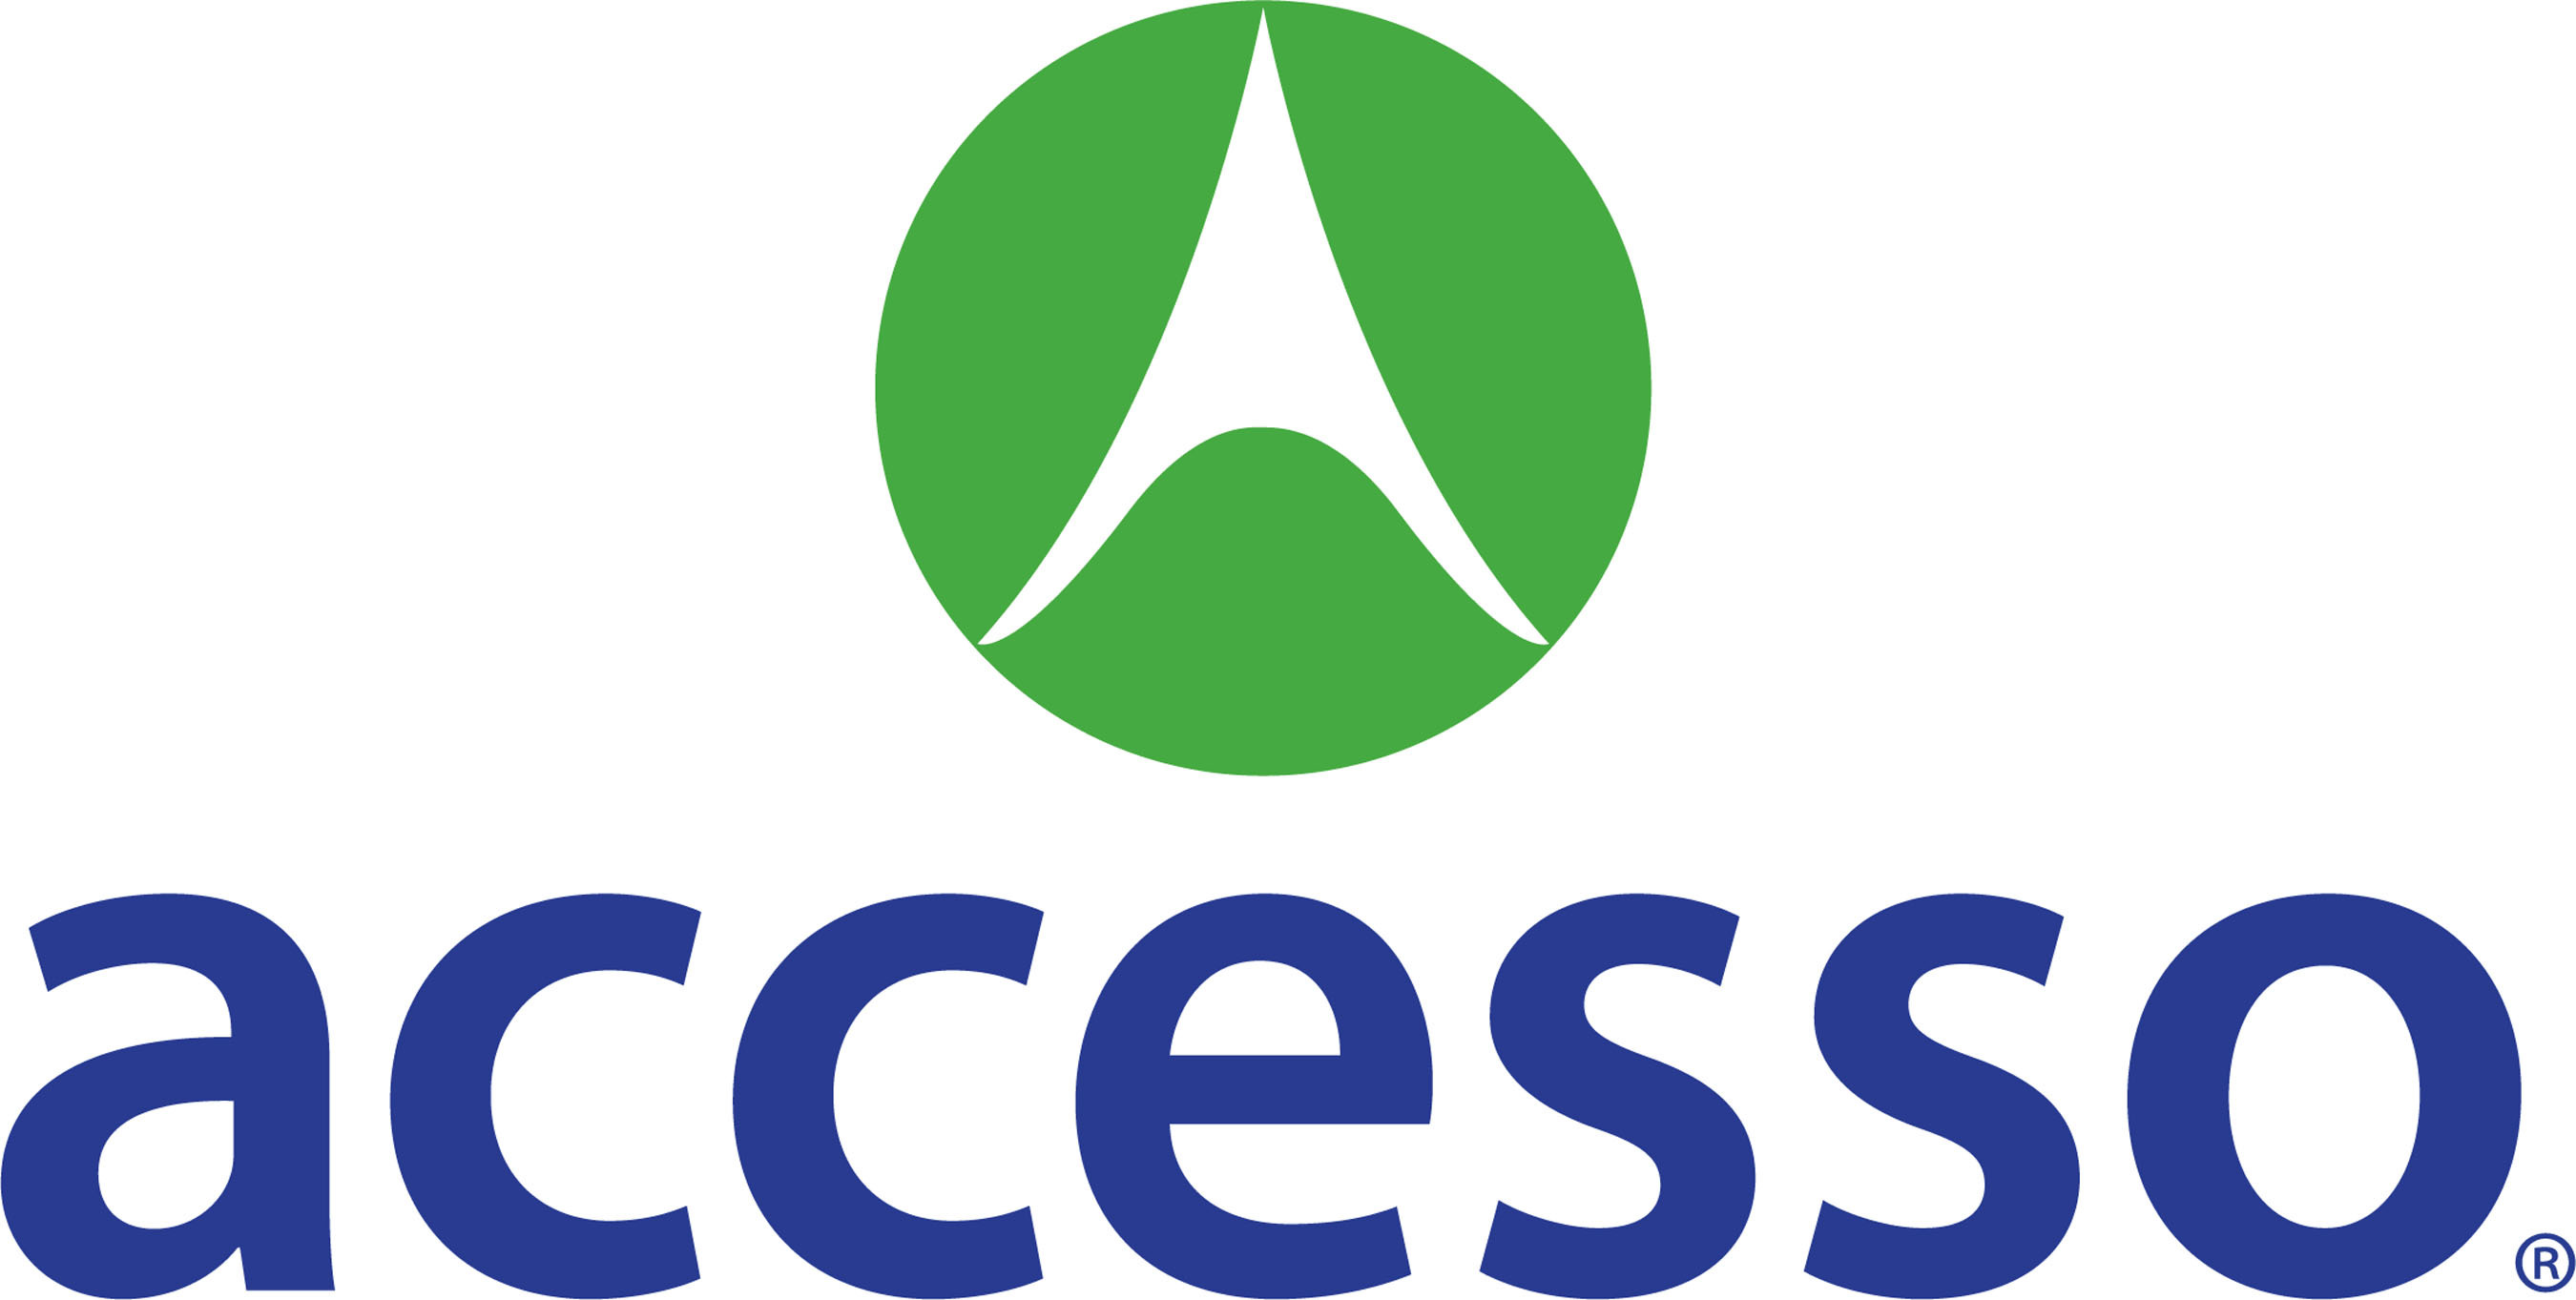 accesso (AIM: ACSO) is the premier technology solutions provider to the global attractions and leisure industry. (PRNewsFoto/accesso) (PRNewsFoto/)